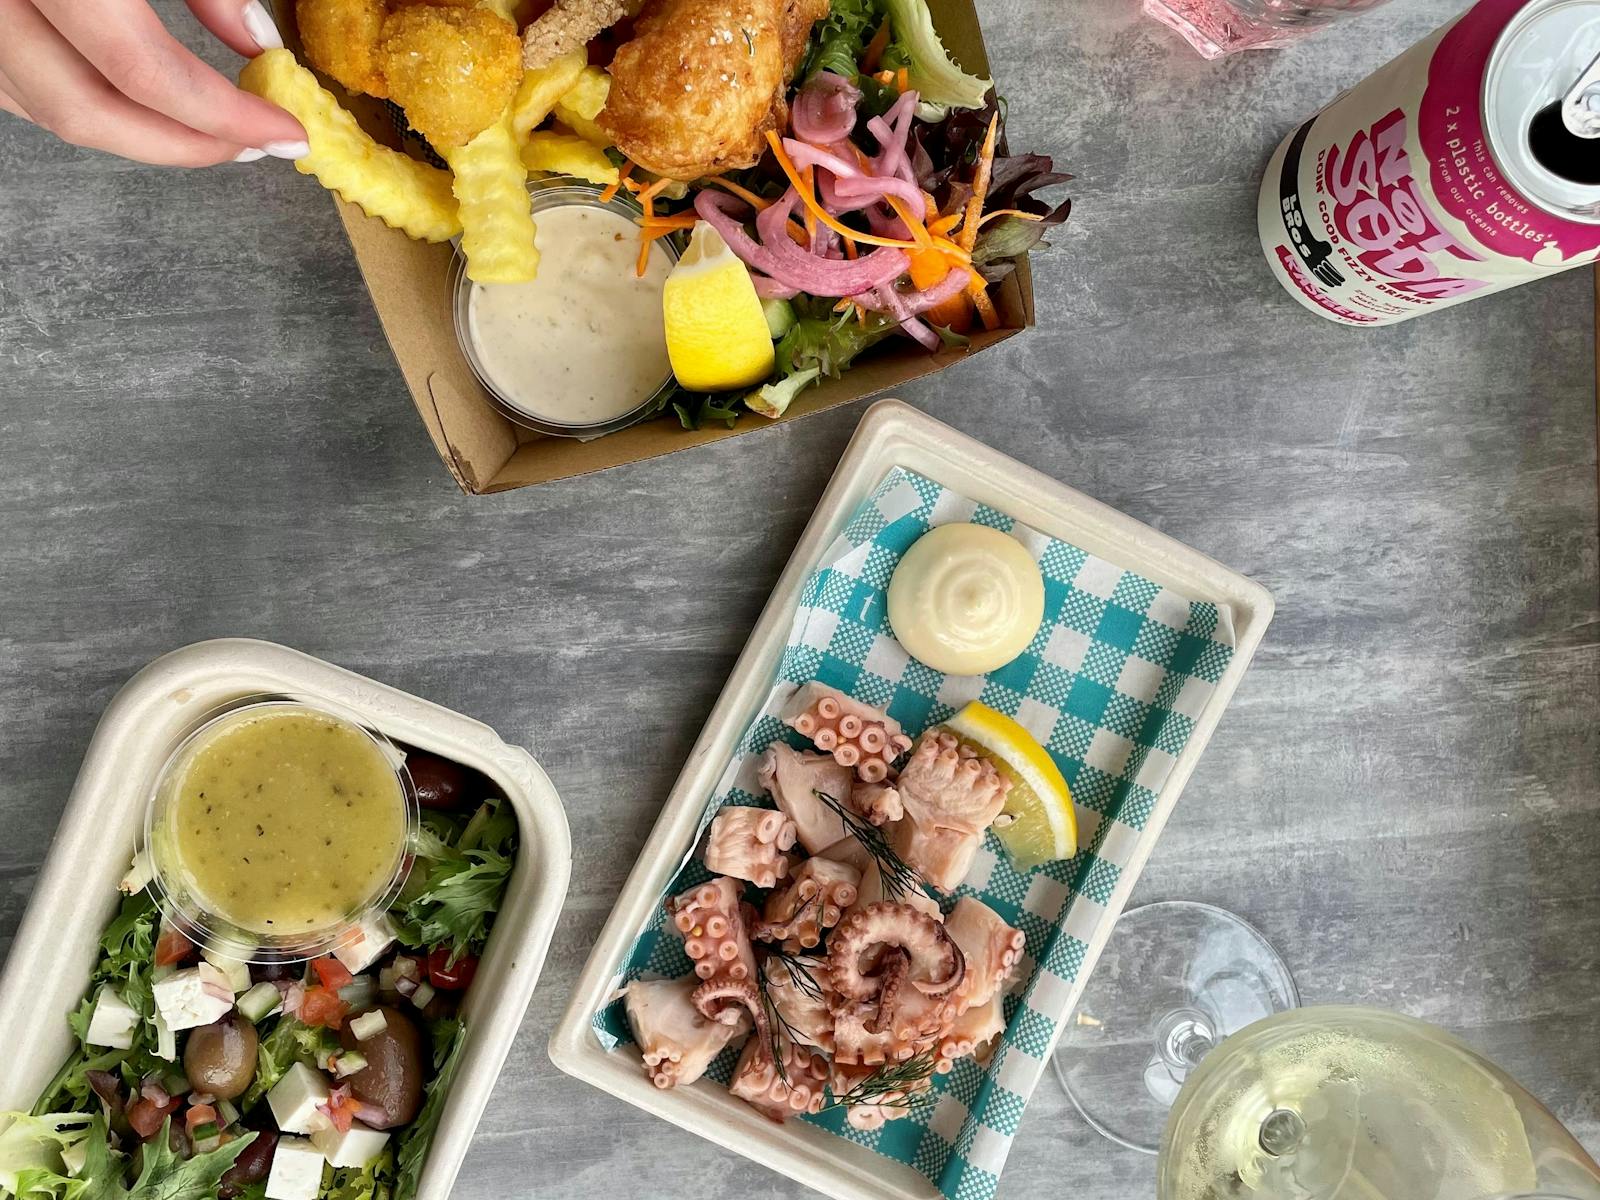 Salad, Pickled Octopus, Shack Box, Wine and Soft Drink